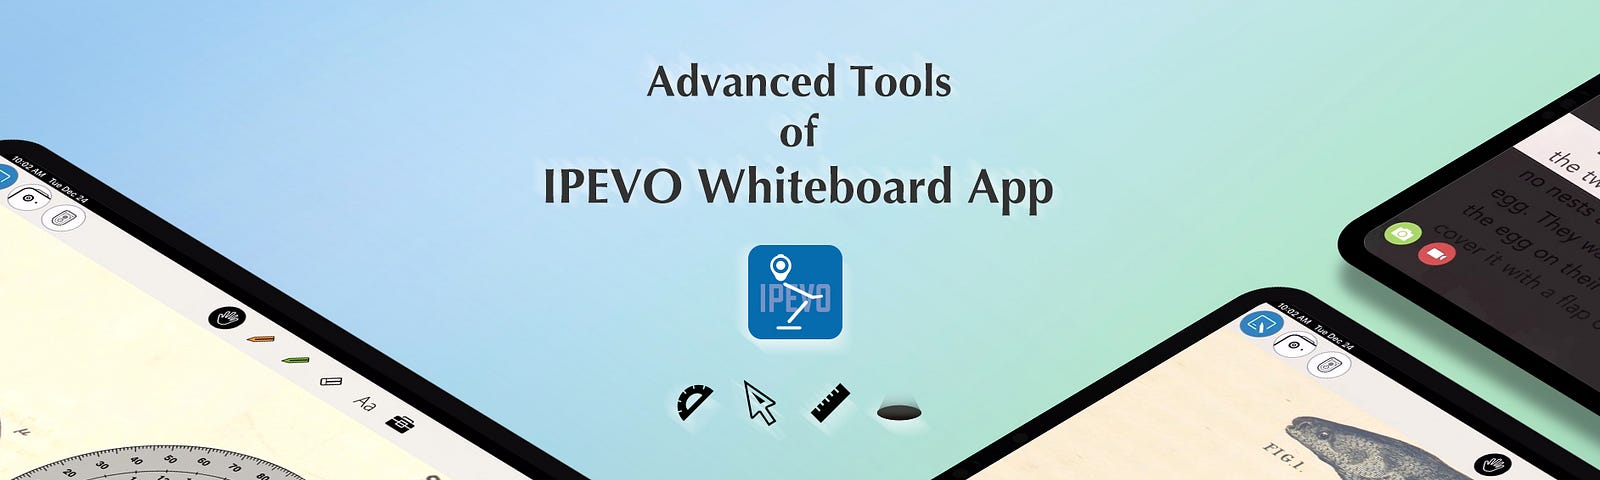 Check out the Advanced Tools of IPEVO Whiteboard app